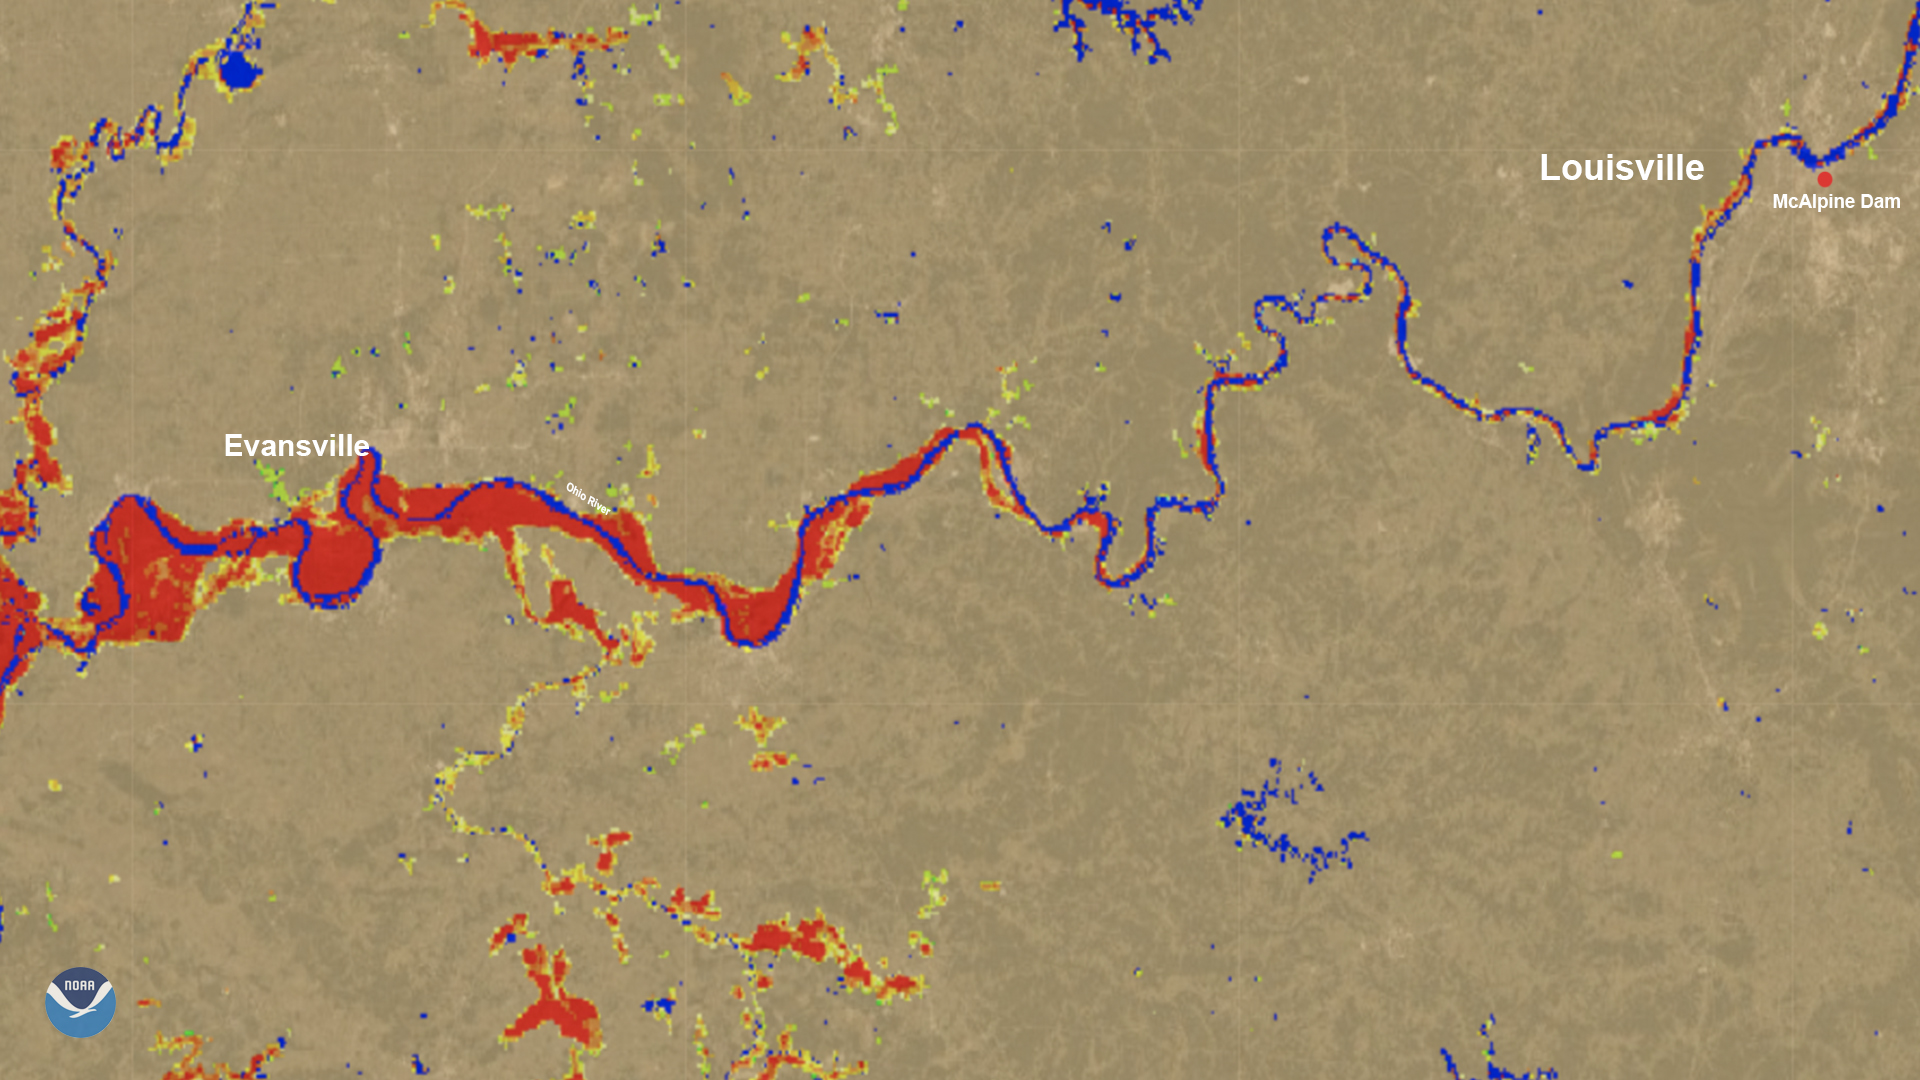 A map of Kentucky, Illinois and Indiana shows the Ohio River in royal blue. Where the river has flooded over its banks, the water is shown in yellow and red. There is quite a bit of flooding in the left-hand side of the image, near Evansville, Indiana.